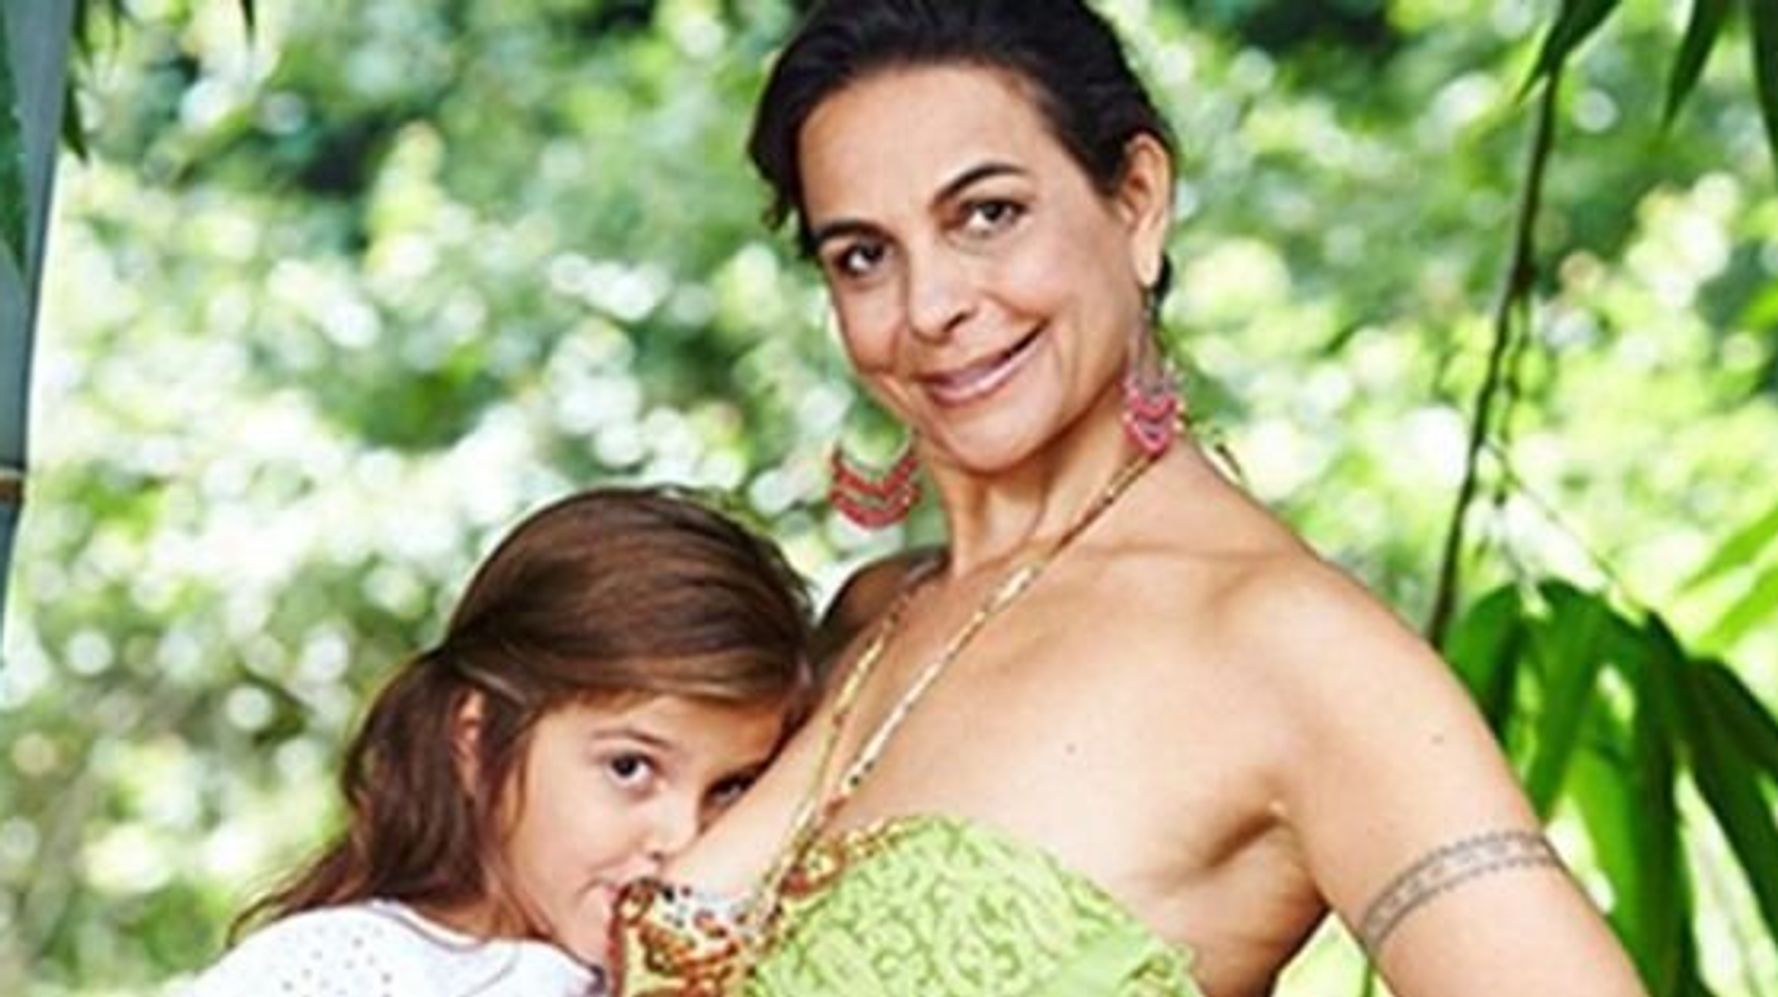 Mom Maha Al Musa Wont Stop Breastfeeding Until Her 6-Year-Old Is Ready ...